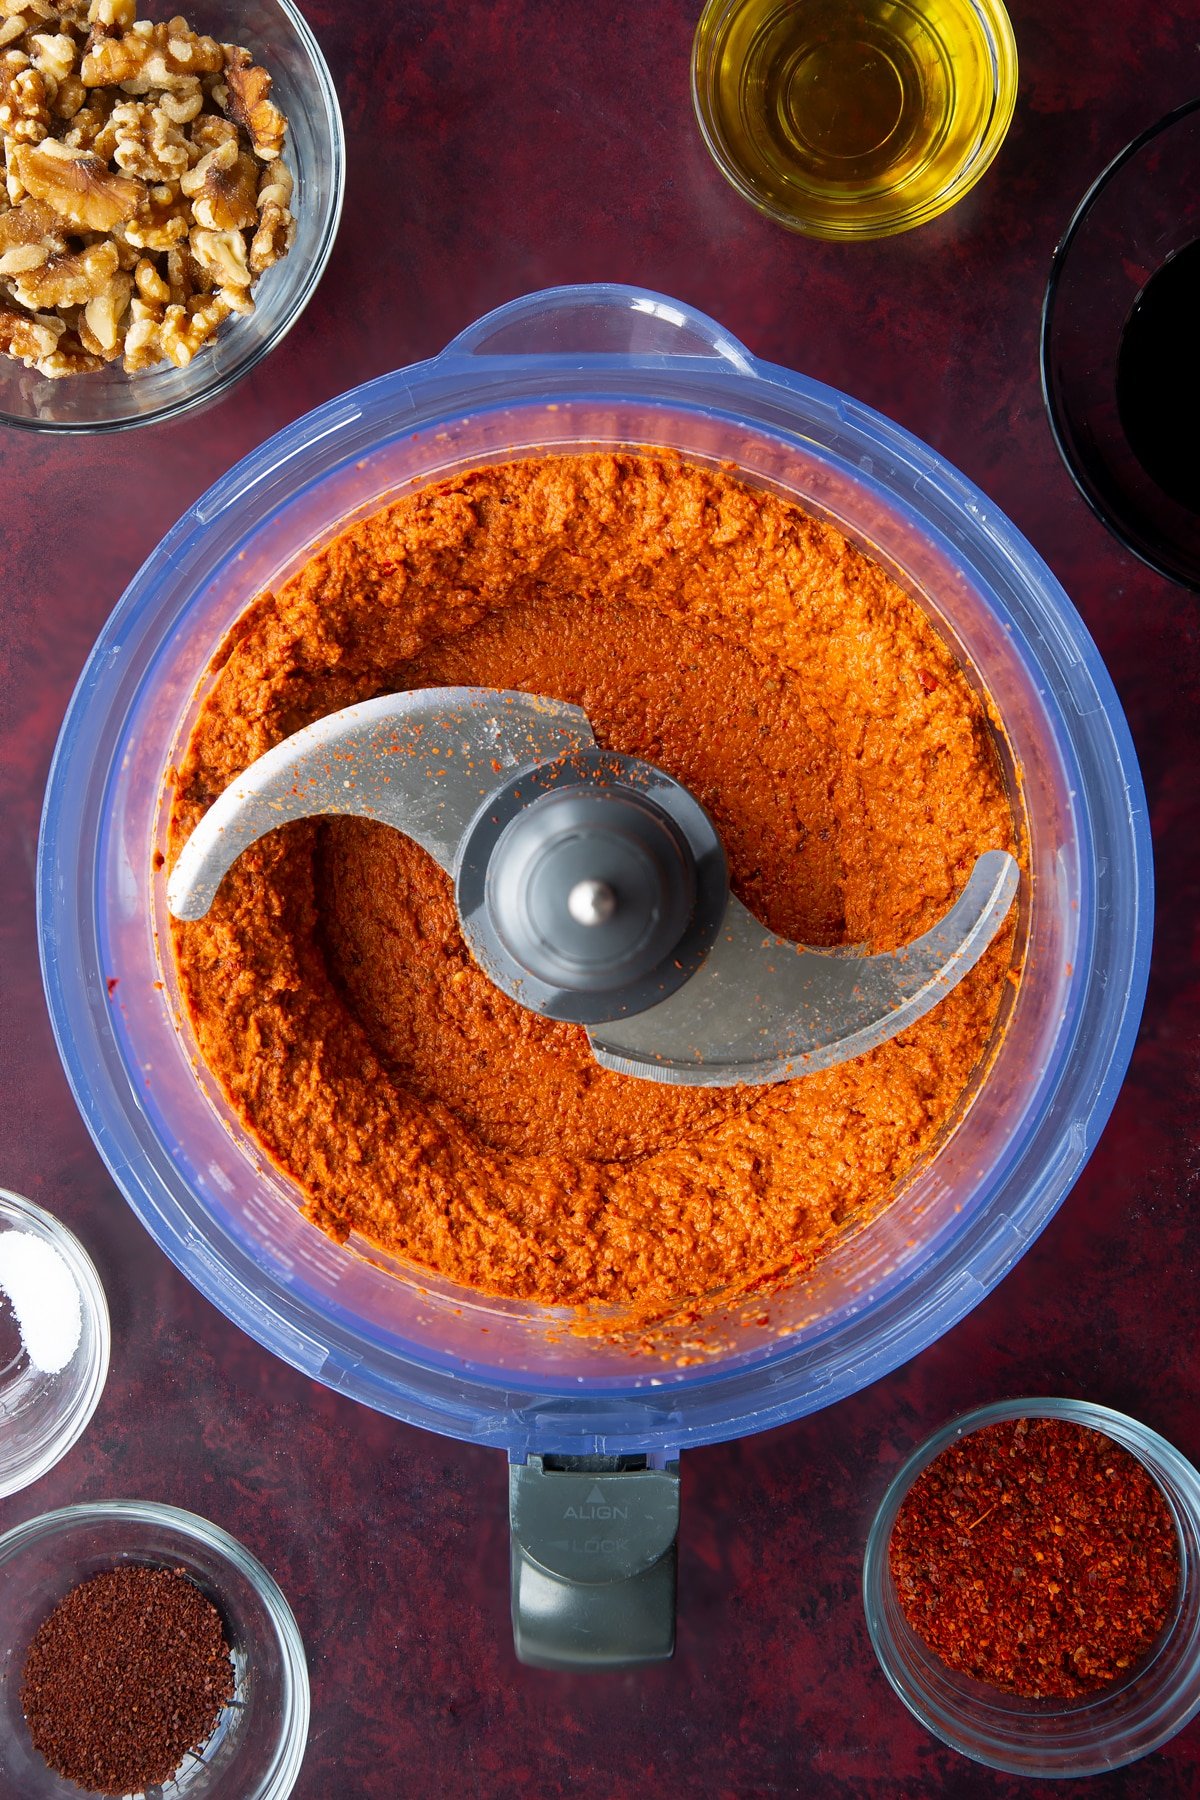 blended peppers, walnuts, olive oil, tomato puree, Aleppo pepper, pomegranate molasses, sumac in a food processor.